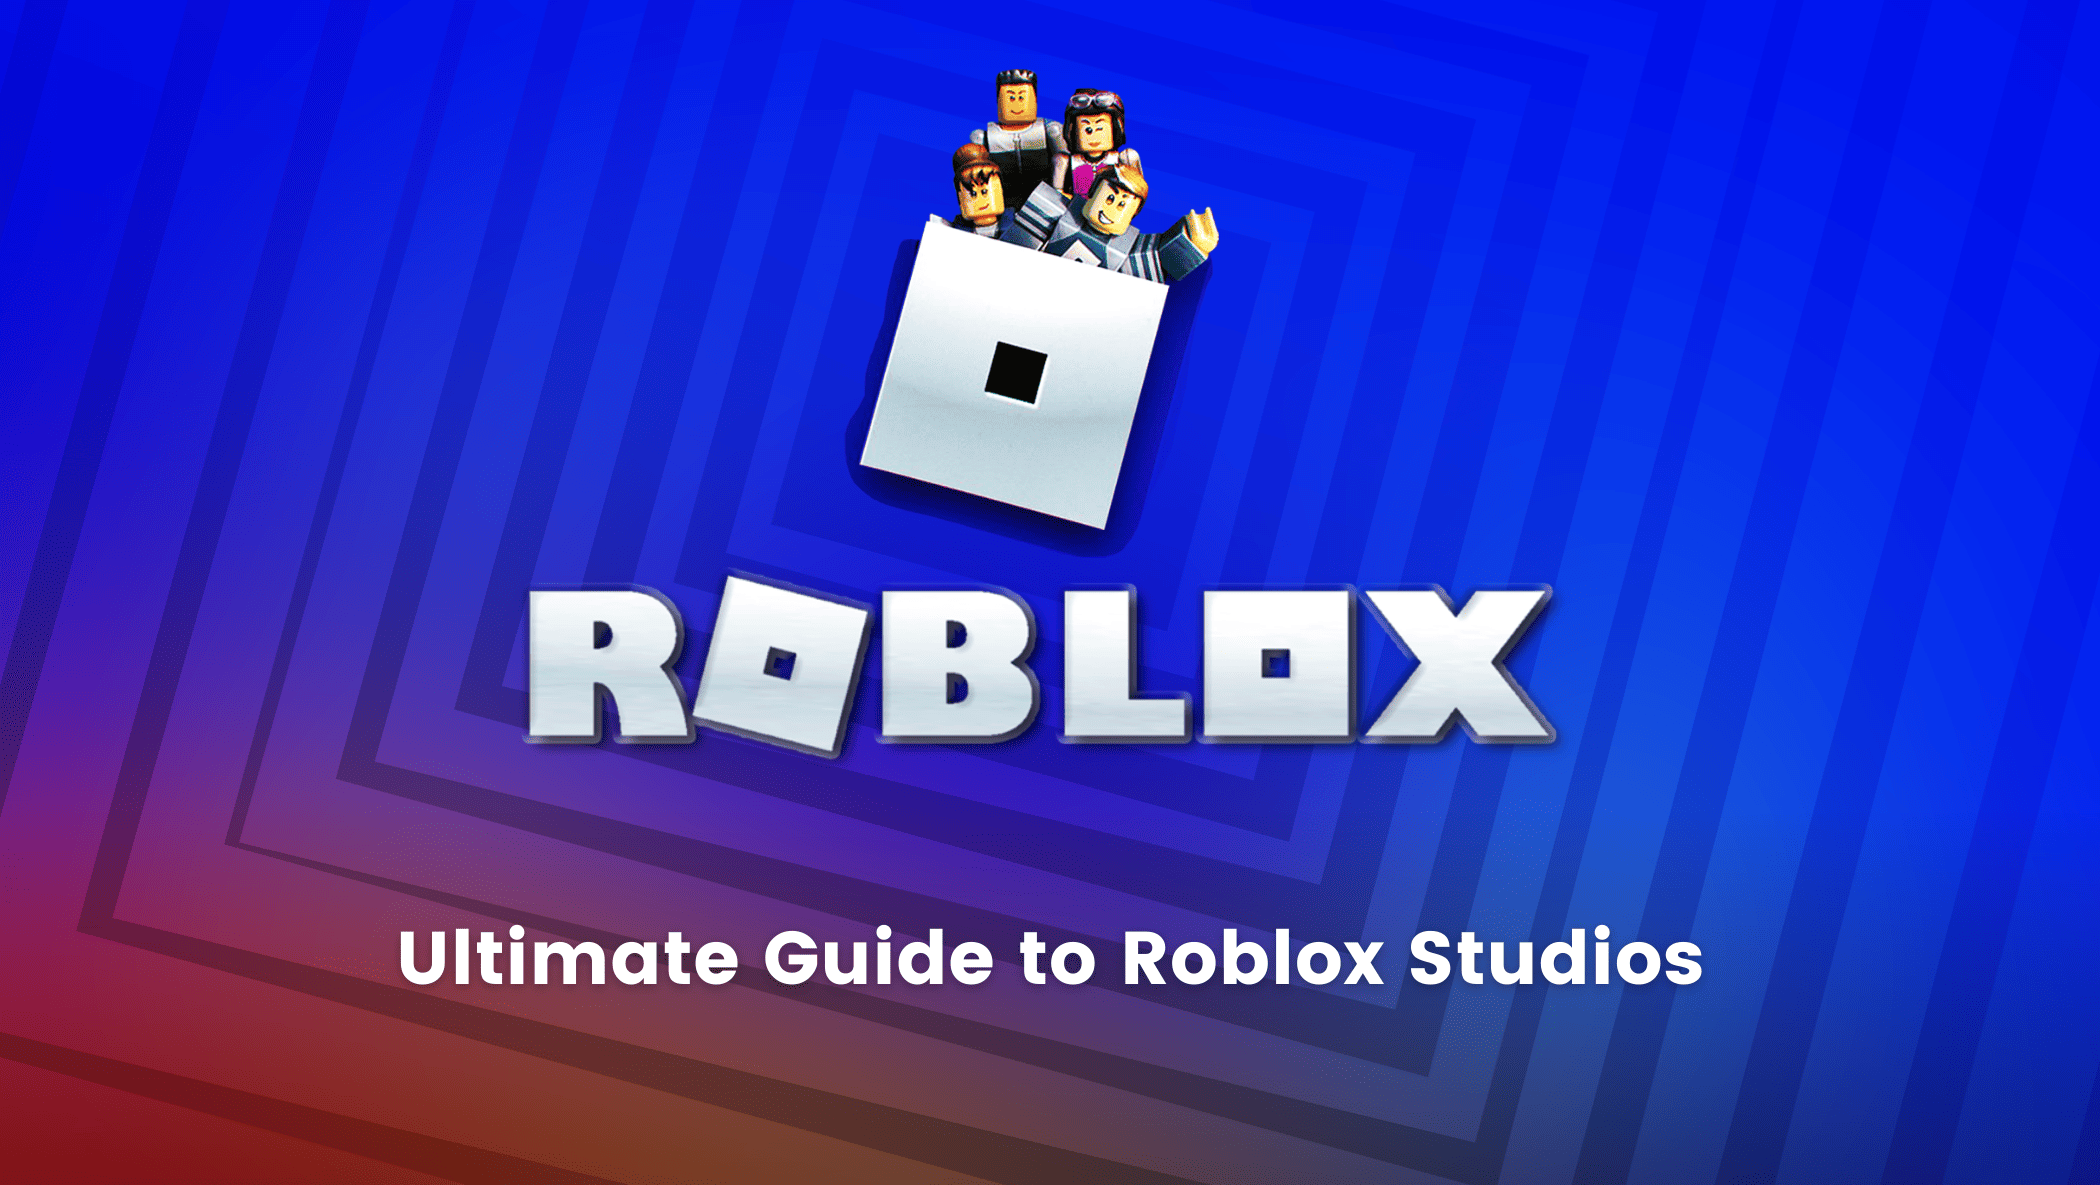 Roblox on X: Looking for models, decals, audio, & plugins? They've moved  from the catalog to the Library tab on the Develop page.   / X